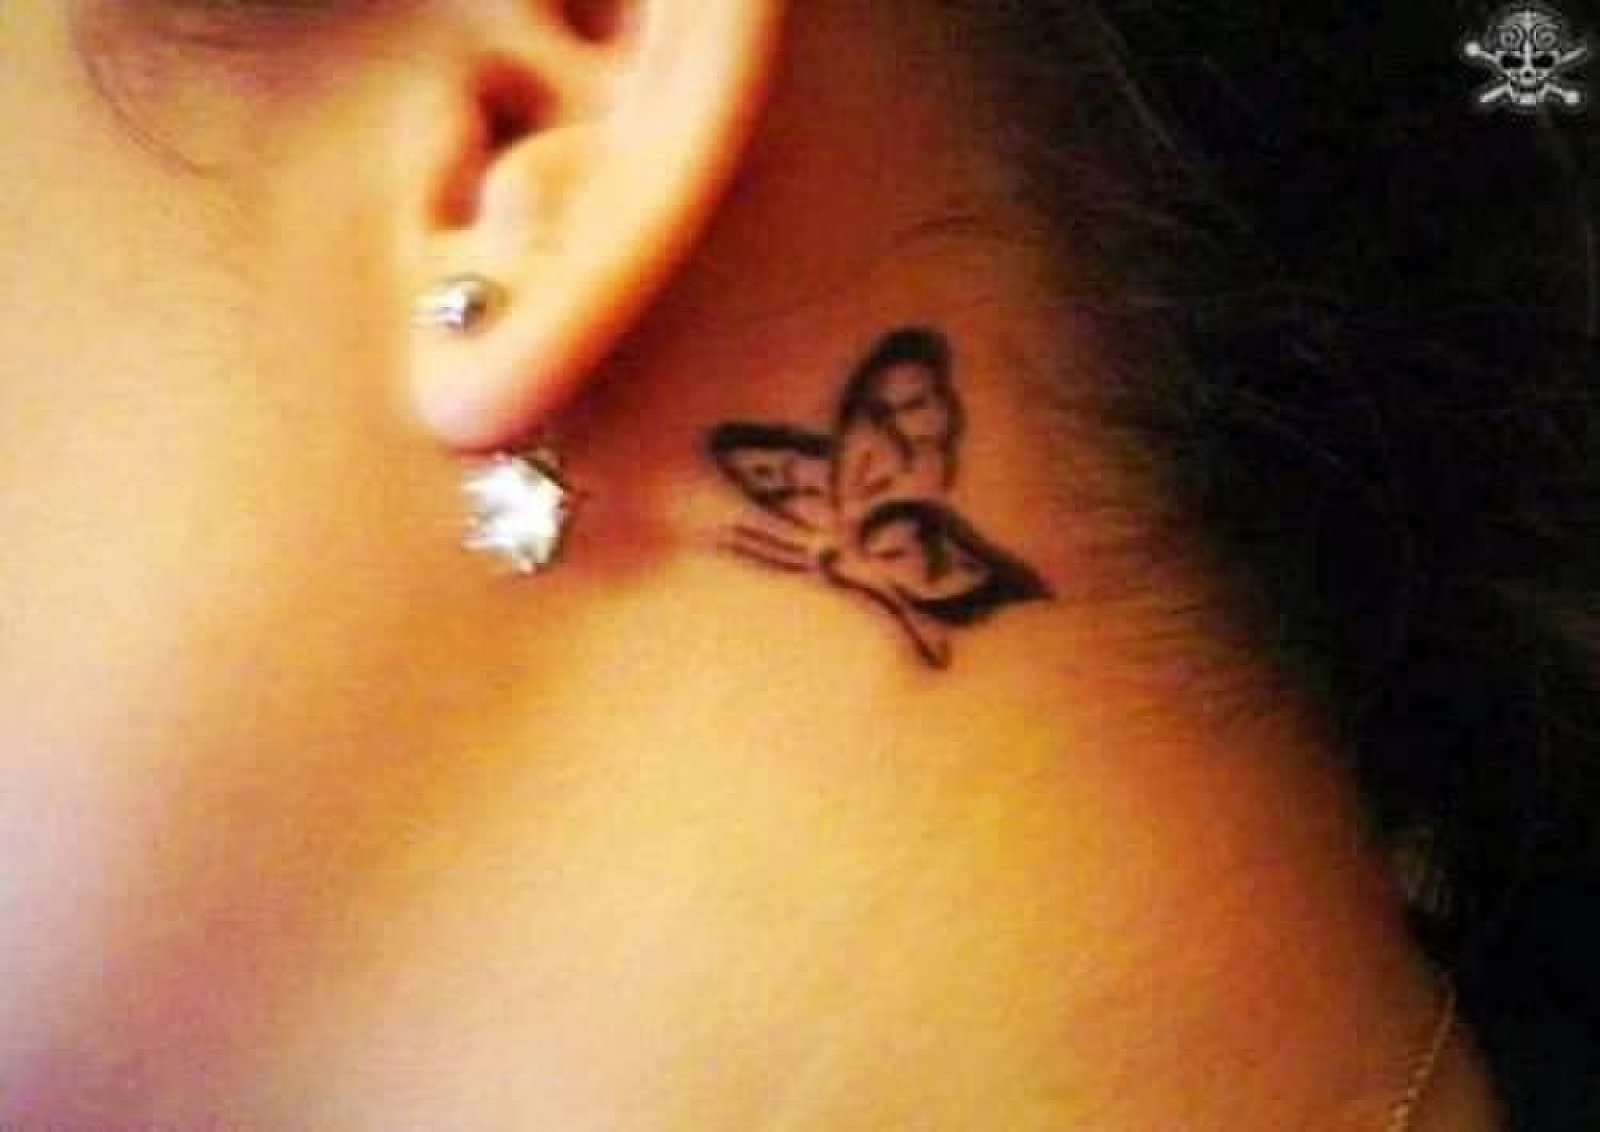 Butterfly Tattoo I Like Small Tattoos Behind The Ear But I Dont for size .....